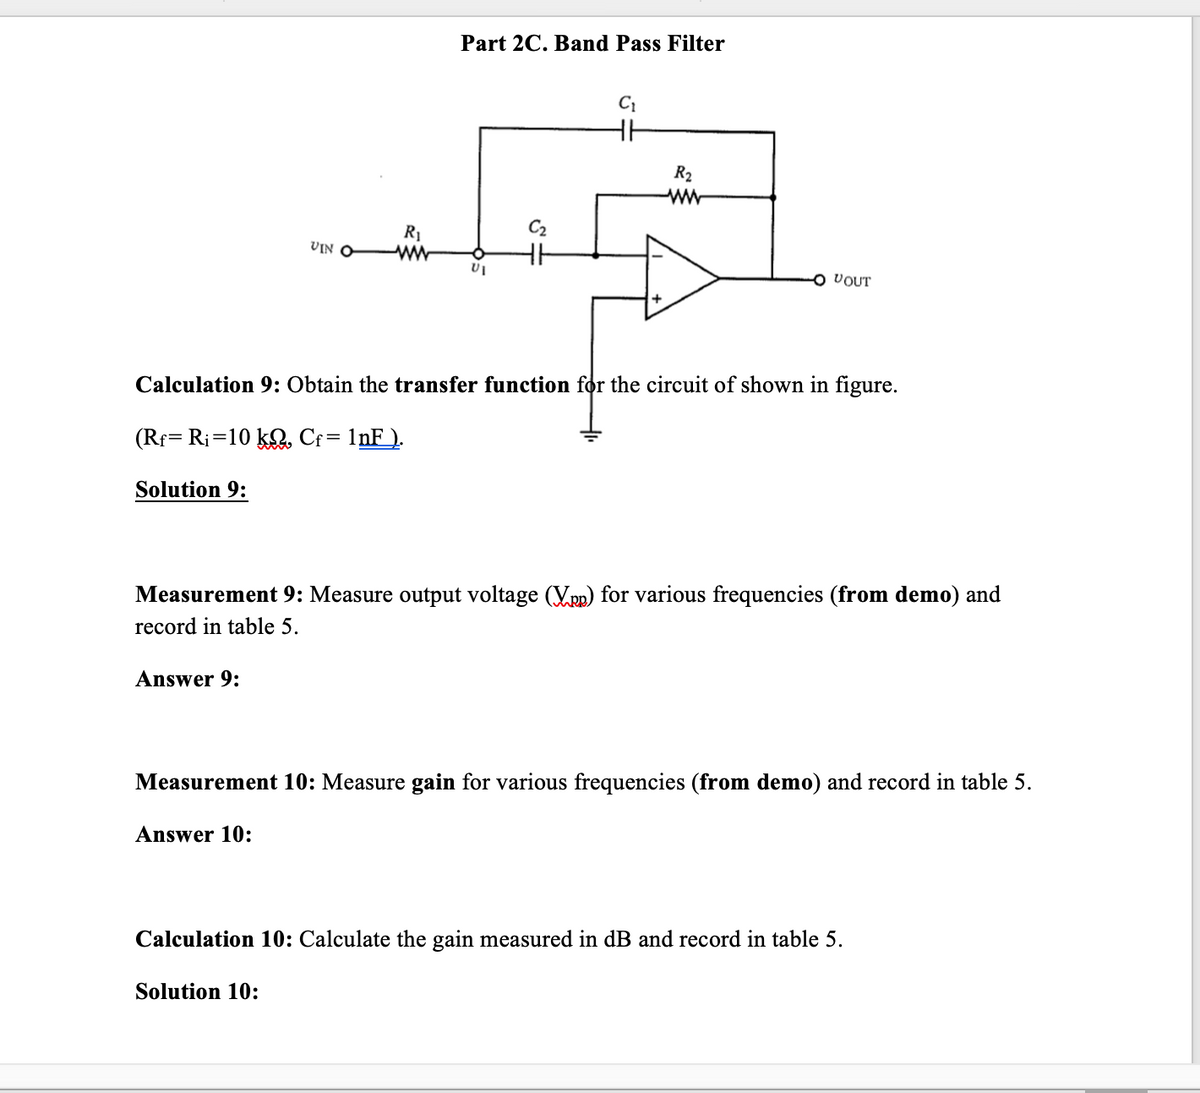 Part 2C. Band Pass Filter
C
R2
R1
C2
VIN
O VOUT
Calculation 9: Obtain the transfer function for the circuit of shown in figure.
(Rf= Ri=10 kQ. Cf= 1nF_).
Solution 9:
Measurement 9: Measure output voltage (Vpp) for various frequencies (from demo) and
record in table 5.
Answer 9:
Measurement 10: Measure gain for various frequencies (from demo) and record in table 5.
Answer 10:
Calculation 10: Calculate the gain measured in dB and record in table 5.
Solution 10:
